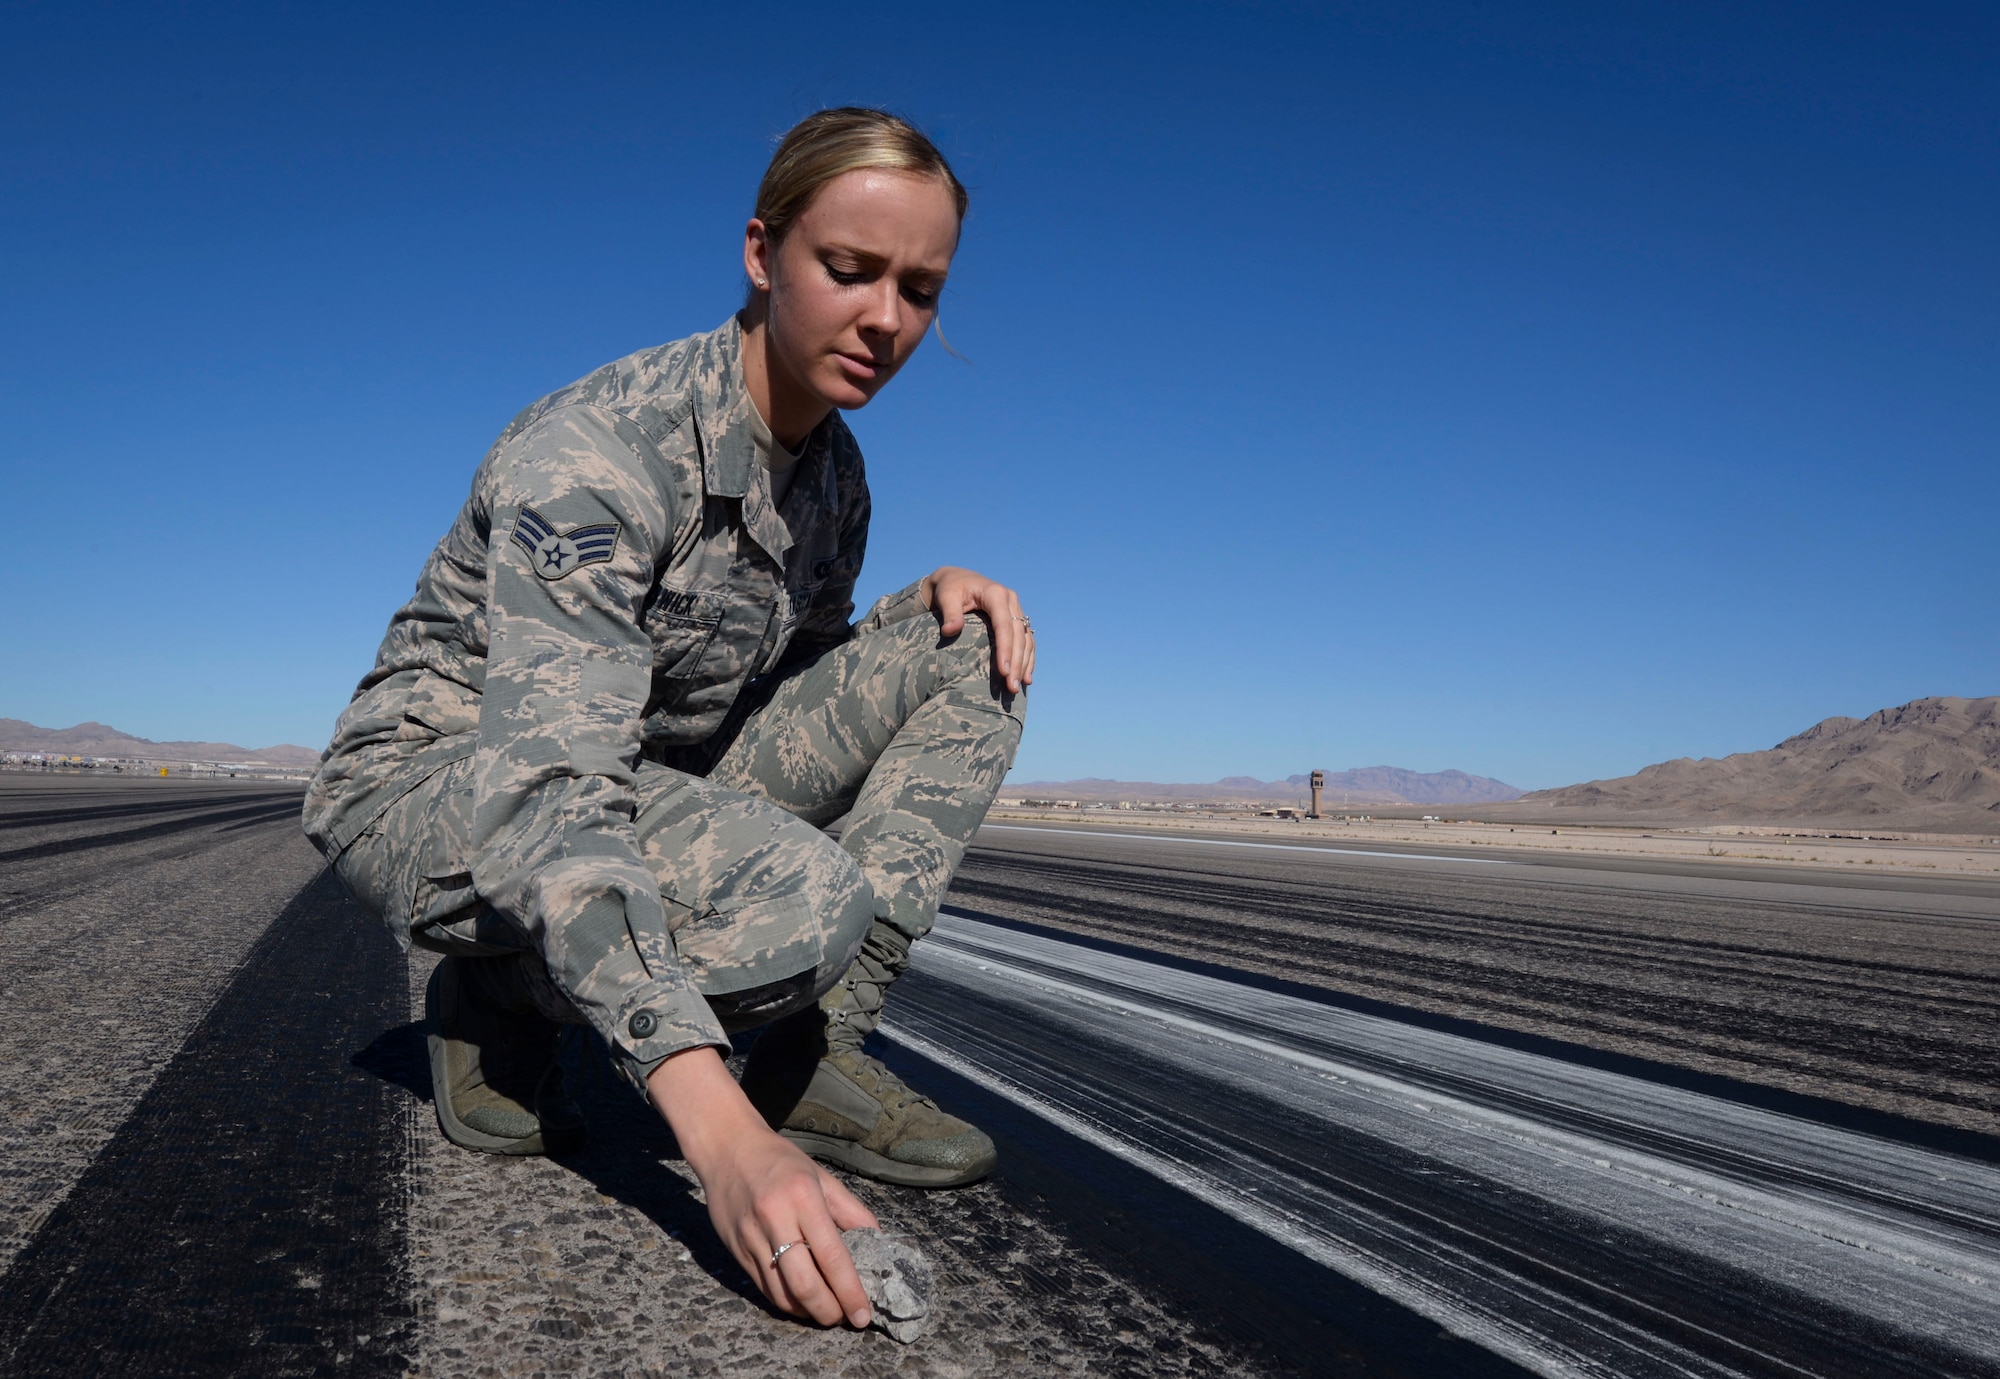 Senior Airman Sierra Rodwick, 57th Operations Support Squadron airfield management shift lead, removes foreign object and debris from a runway Oct. 15, 2018 on Nellis Air Force Base, Nevada. The professionalism and urgency demonstrated by airfield management on a daily basis are what keep Nellis a step above the rest. (U.S. Air Force photo by Airman Bailee A. Darbasie)